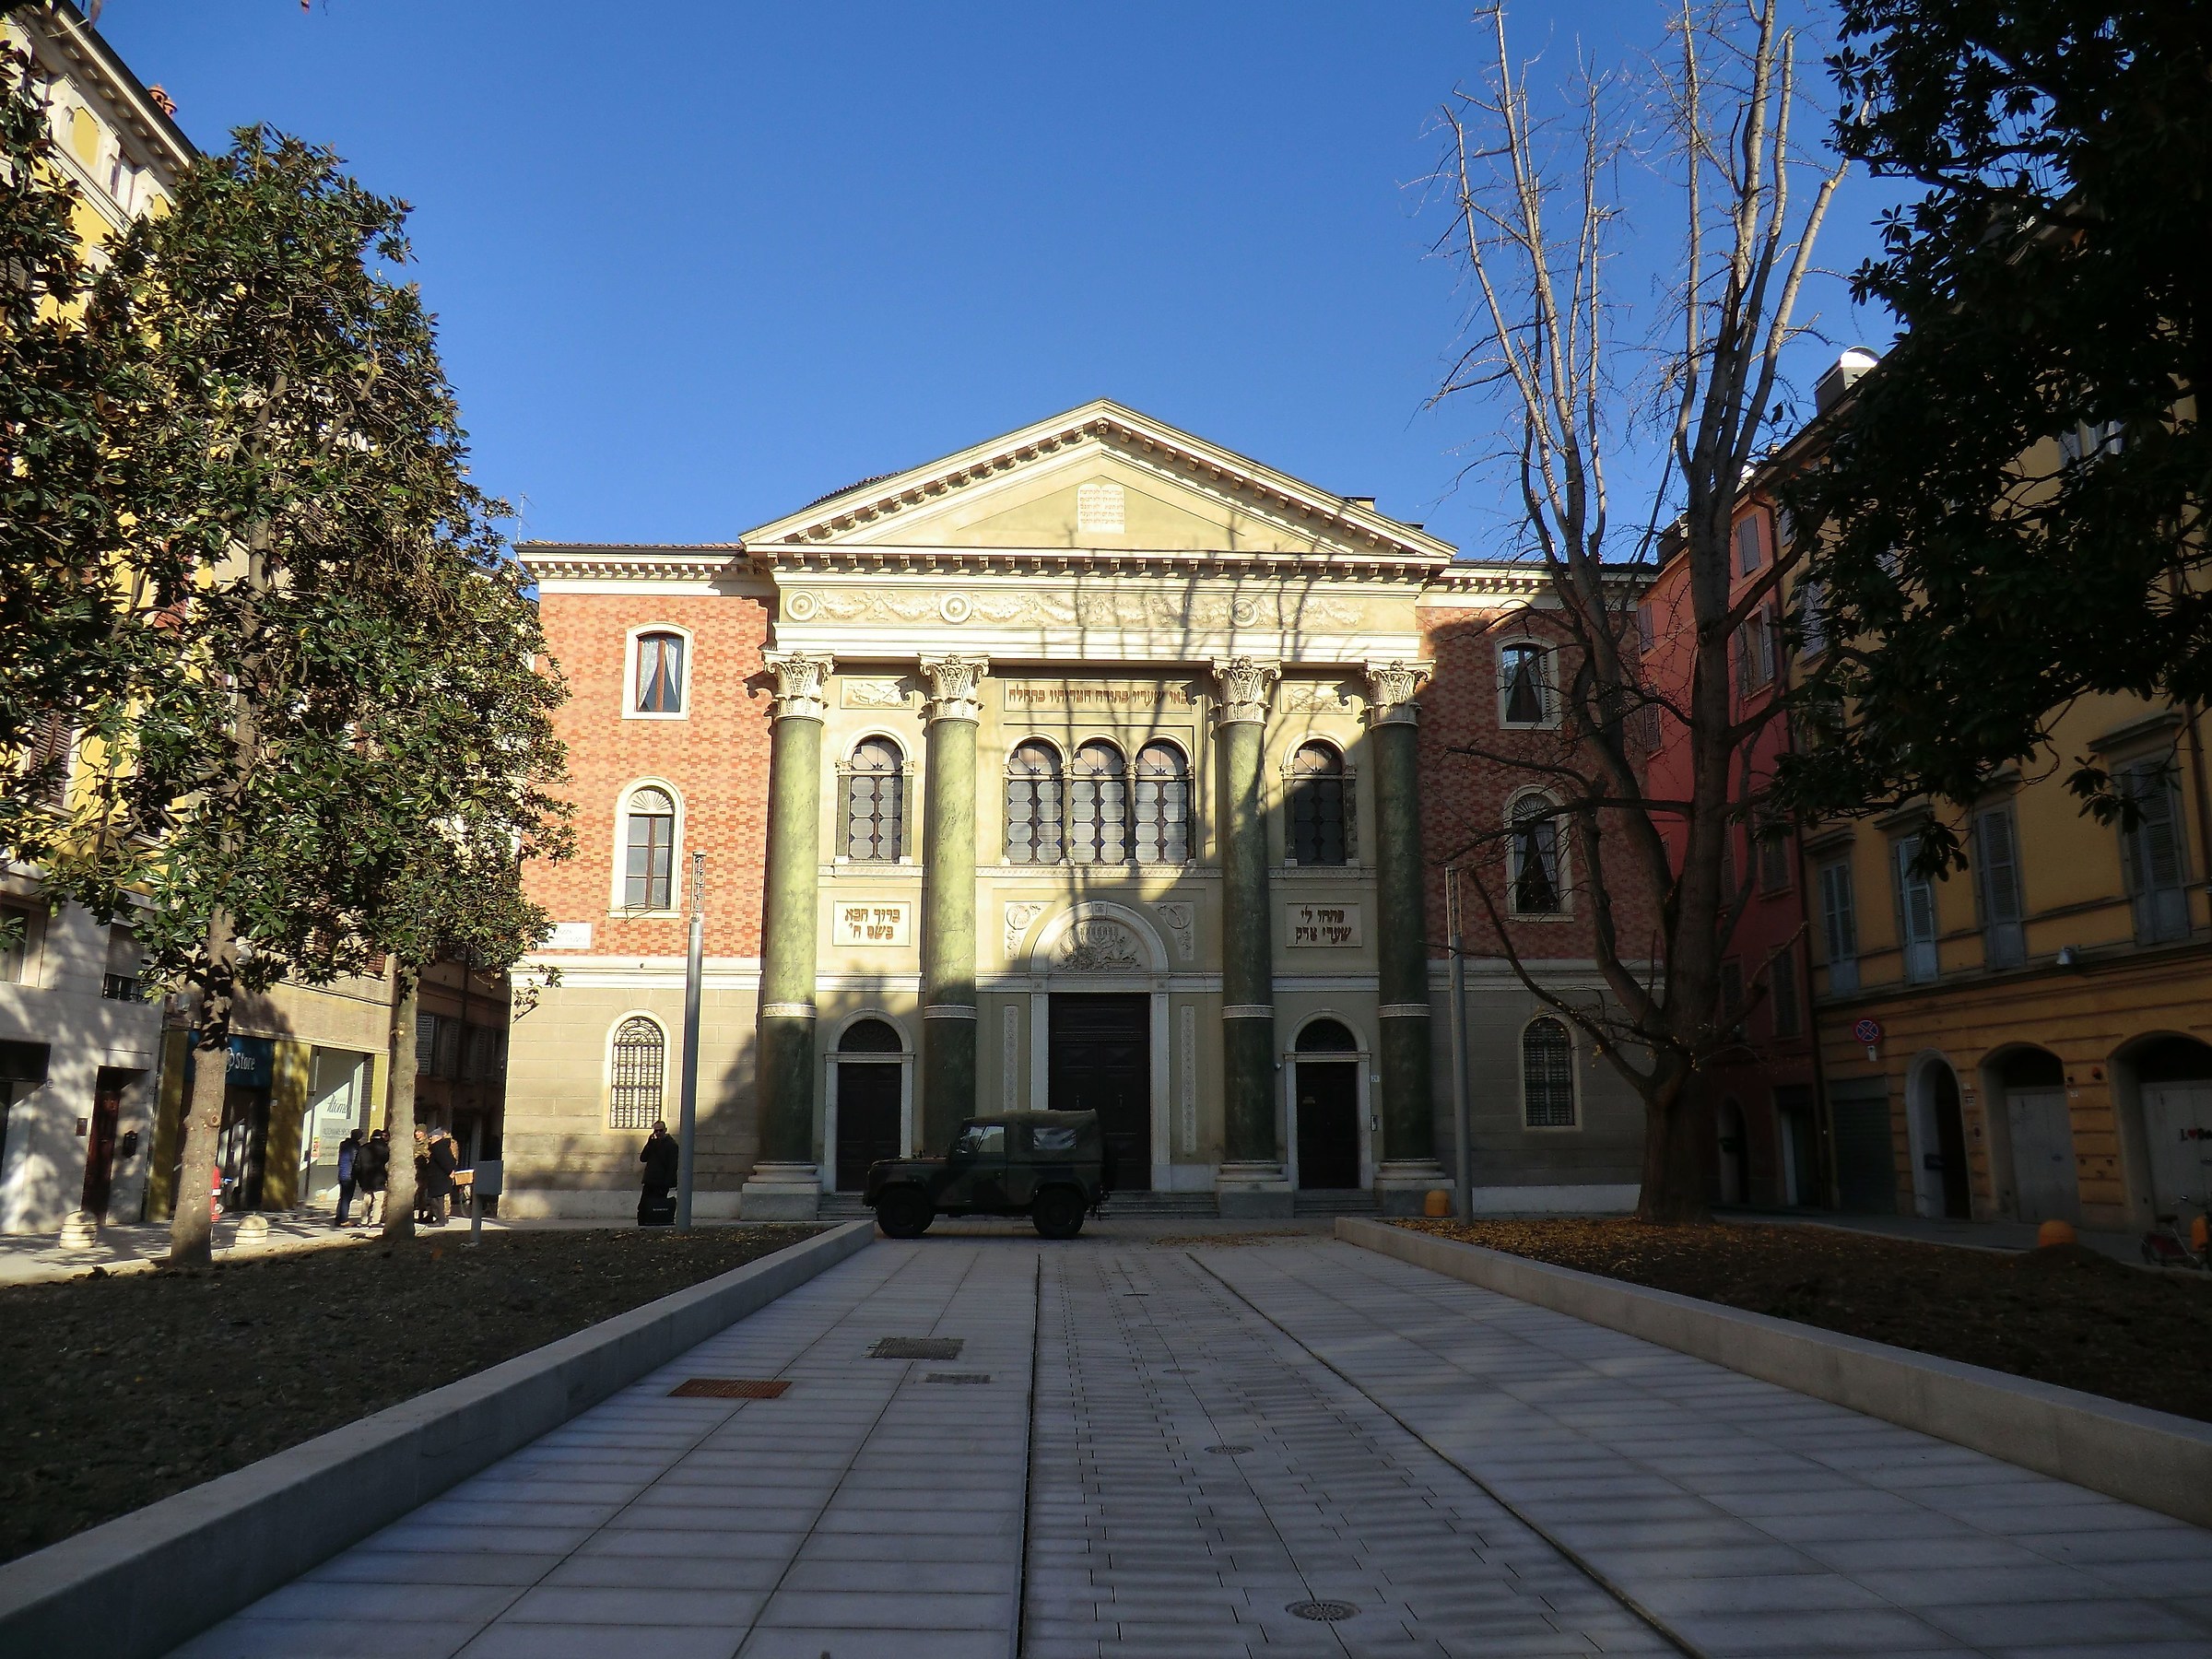 The Synagogue of Modena...